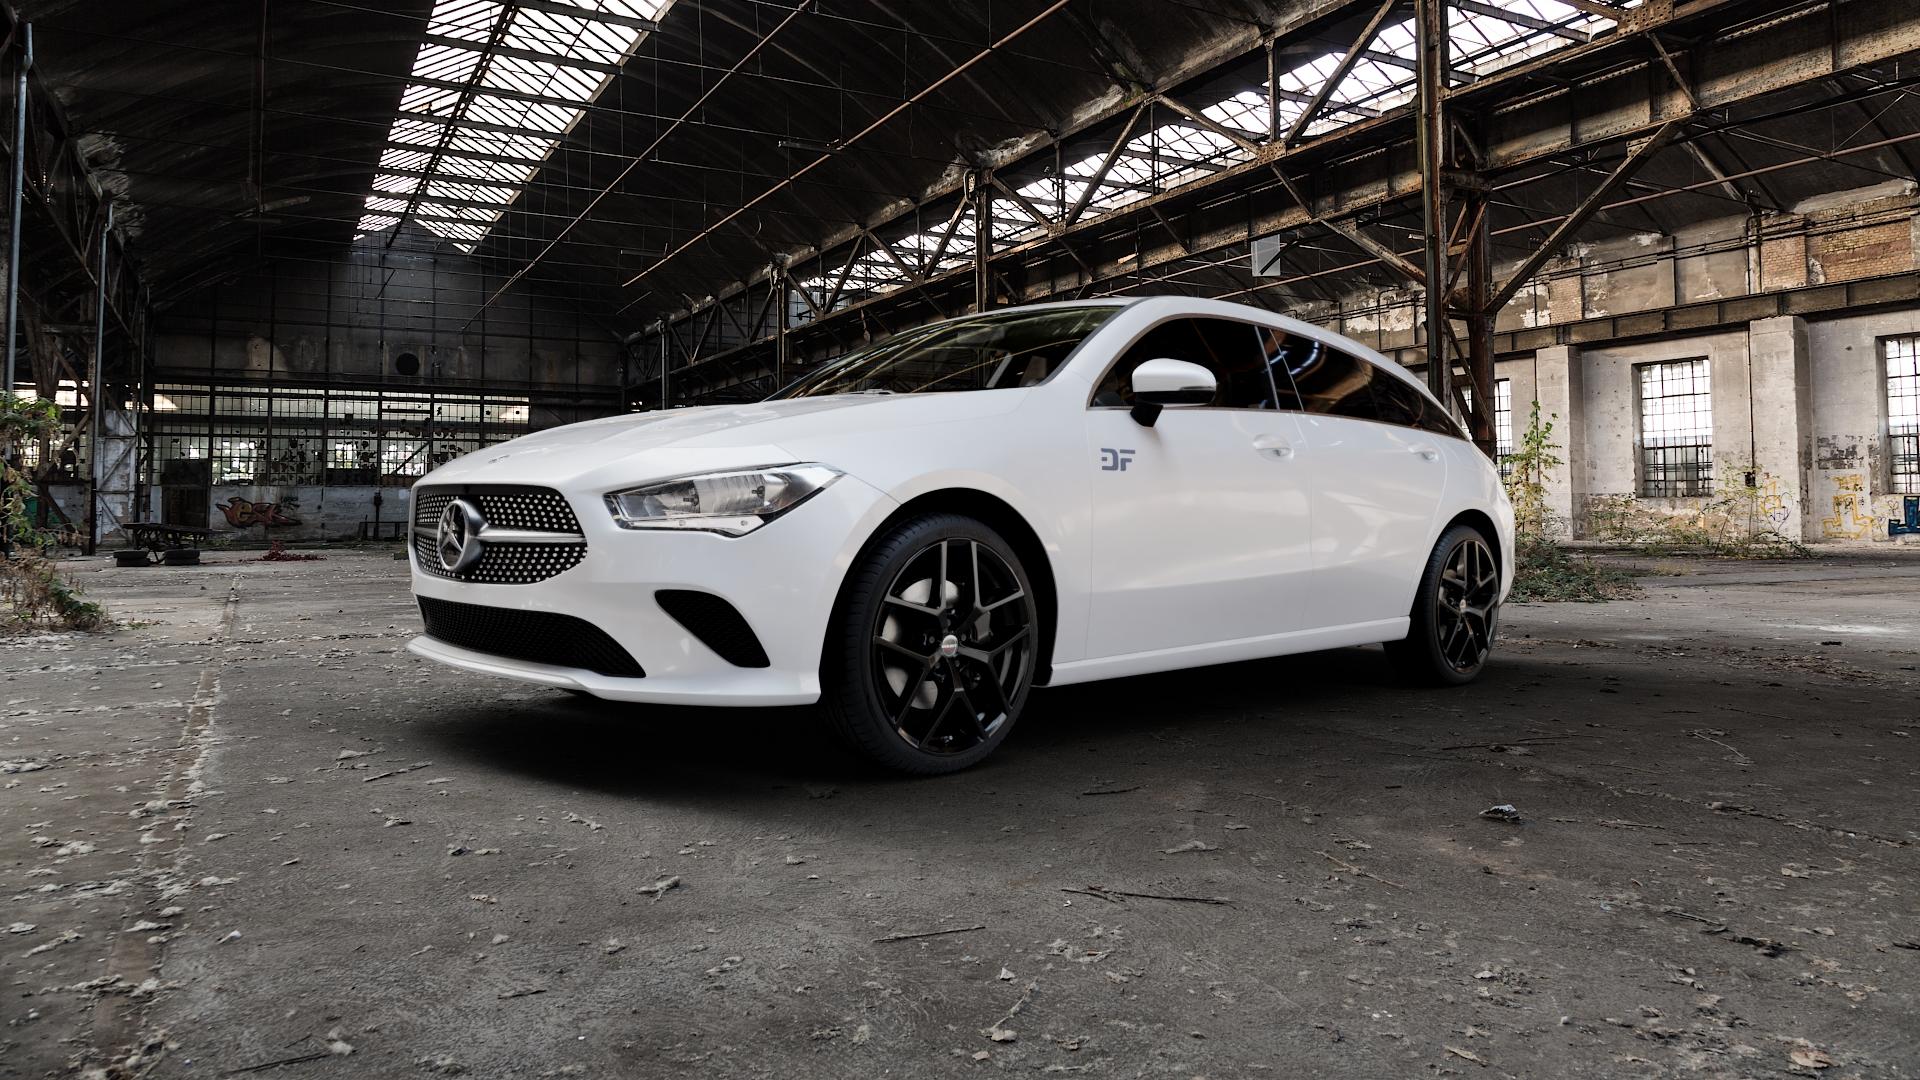 Mercedes CLA-Class II Shooting Brake Type C118 (F2CLA) 2,0l CLA 220 d 140kW  (190 hp) Wheels and Tyre Packages | velonity.com